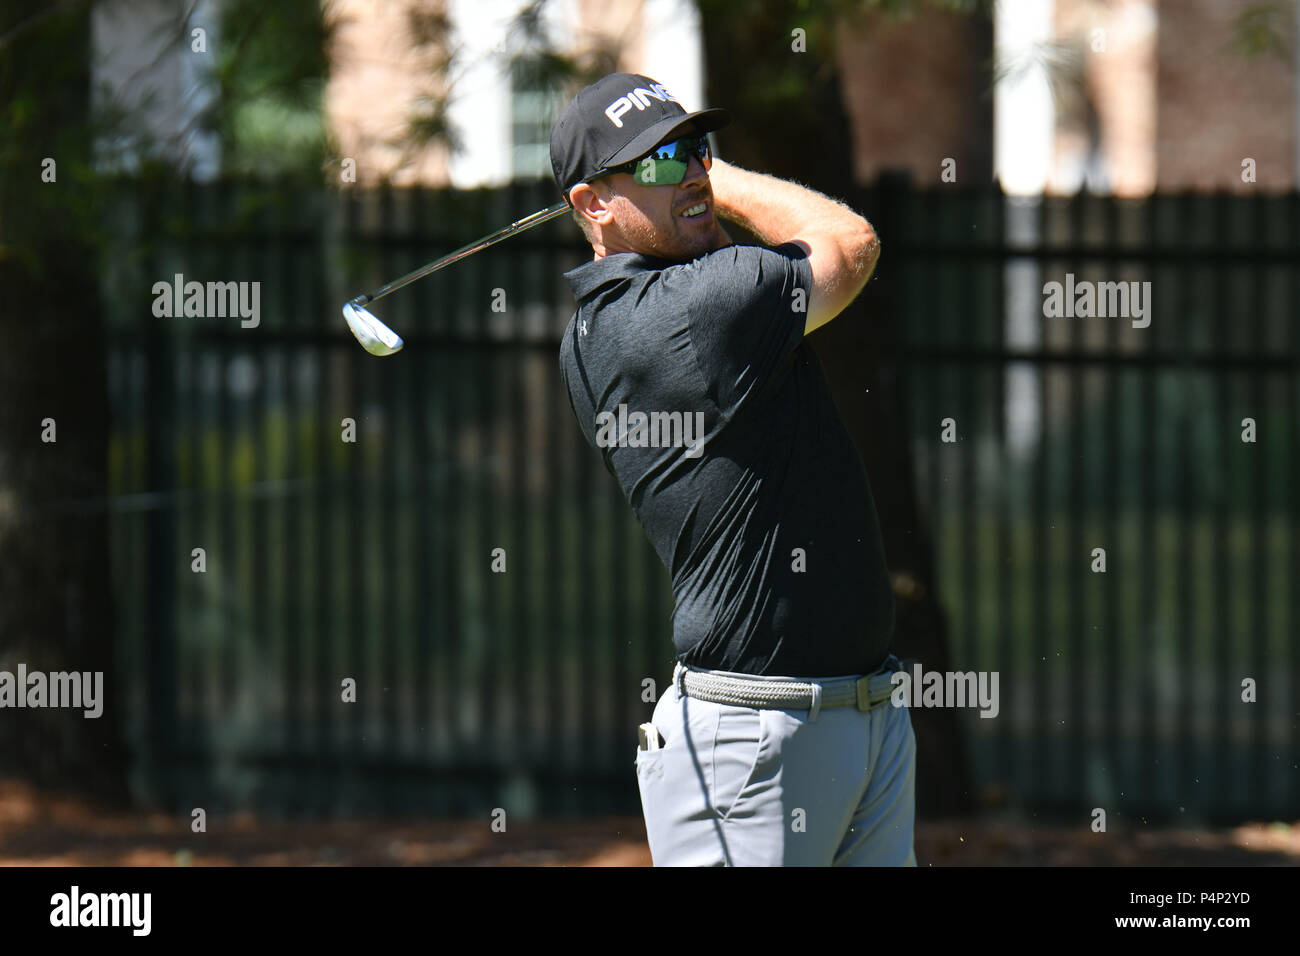 Thursday June 21, 2018: Hunter Mahan hits his tee shot on the 8th hole during the opening round of the Travelers Golf Championship at TPC River Highlands in Cromwell, Connecticut. Gregory Vasil/CSM Stock Photo